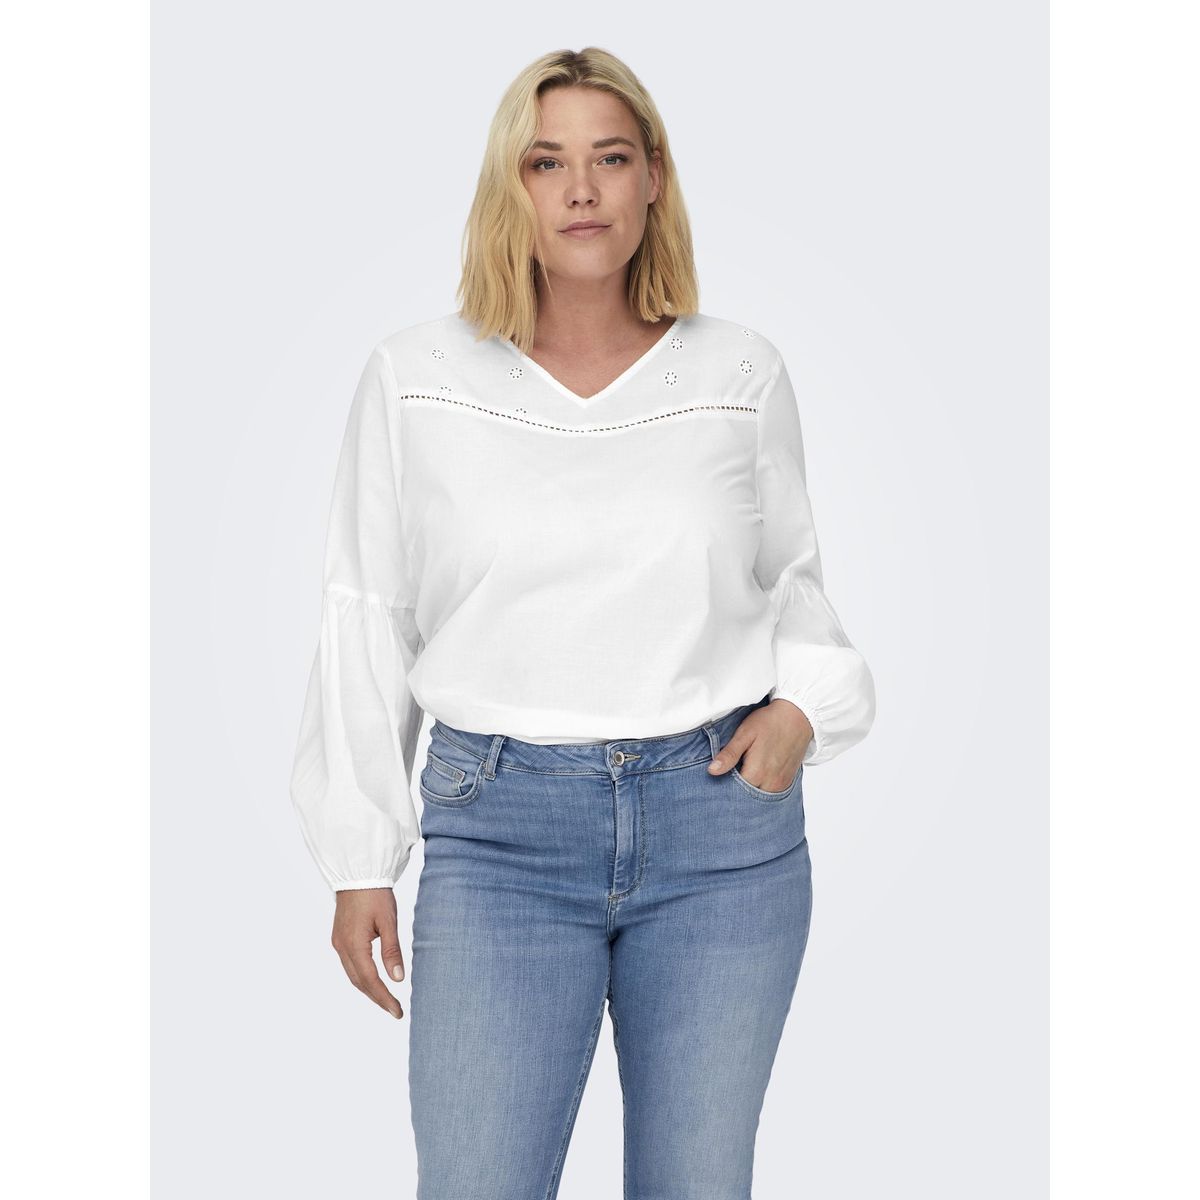 Top carchalinos l/s top wvn Only Carmakoma | La Redoute